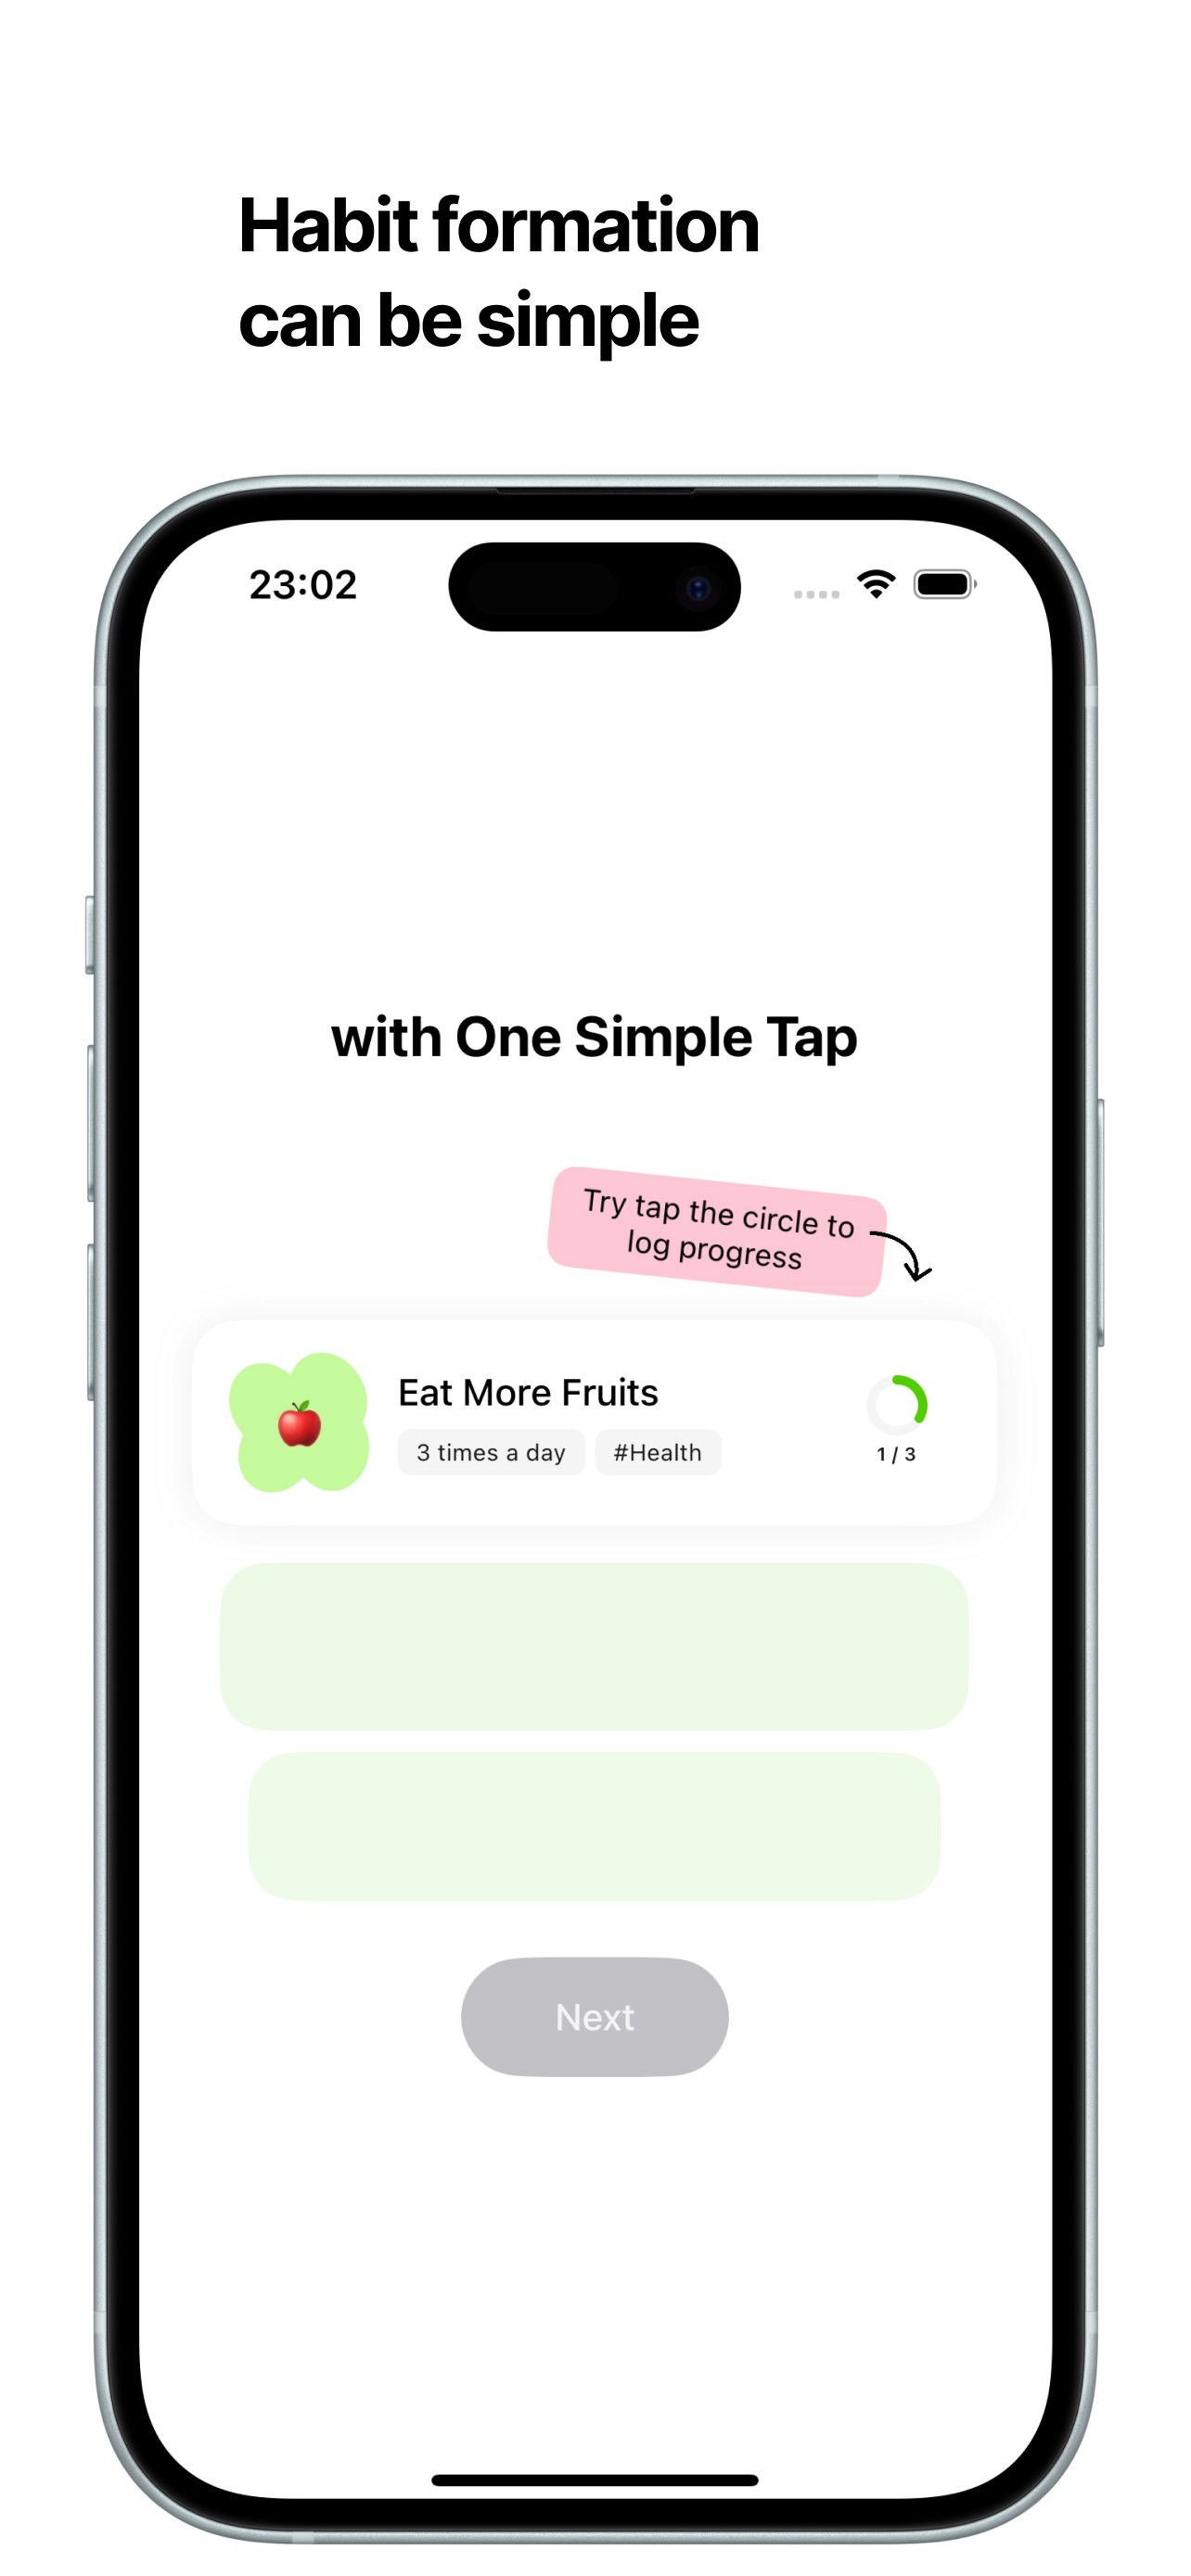 habitie - An iOS app designed to assist users in developing habits.